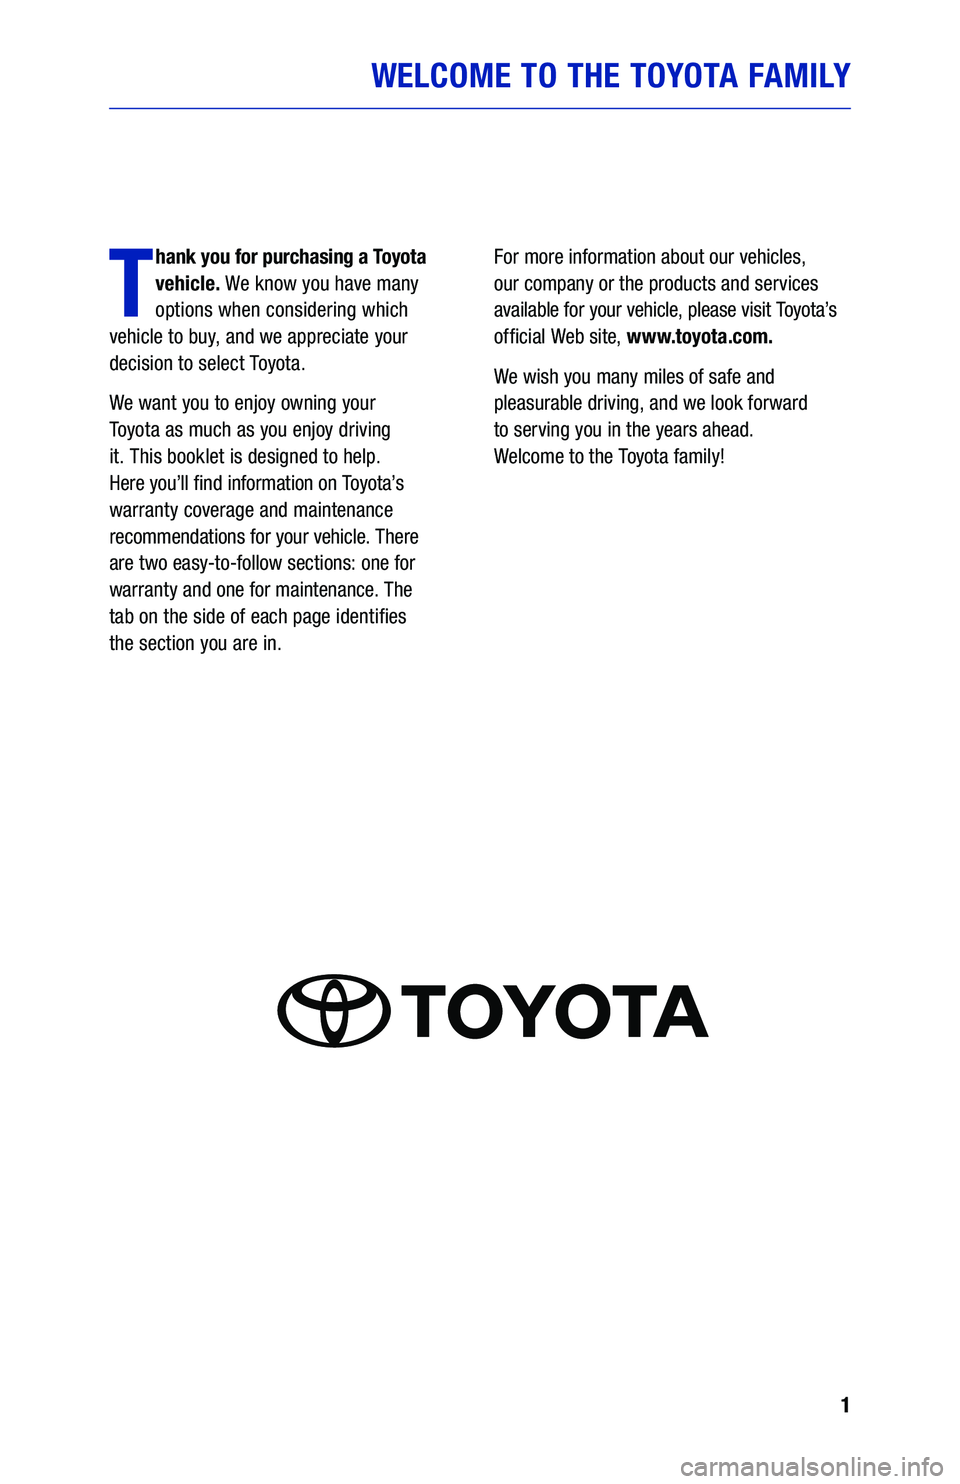 TOYOTA AVALON 2019  Warranties & Maintenance Guides (in English) 1
WELCOME TO THE TOYOTA FAMILY
T
hank you for purchasing a Toyota 
vehicle. We know you have many 
options when considering which   
vehicle to buy, and we appreciate your 
decision to select Toyota.
